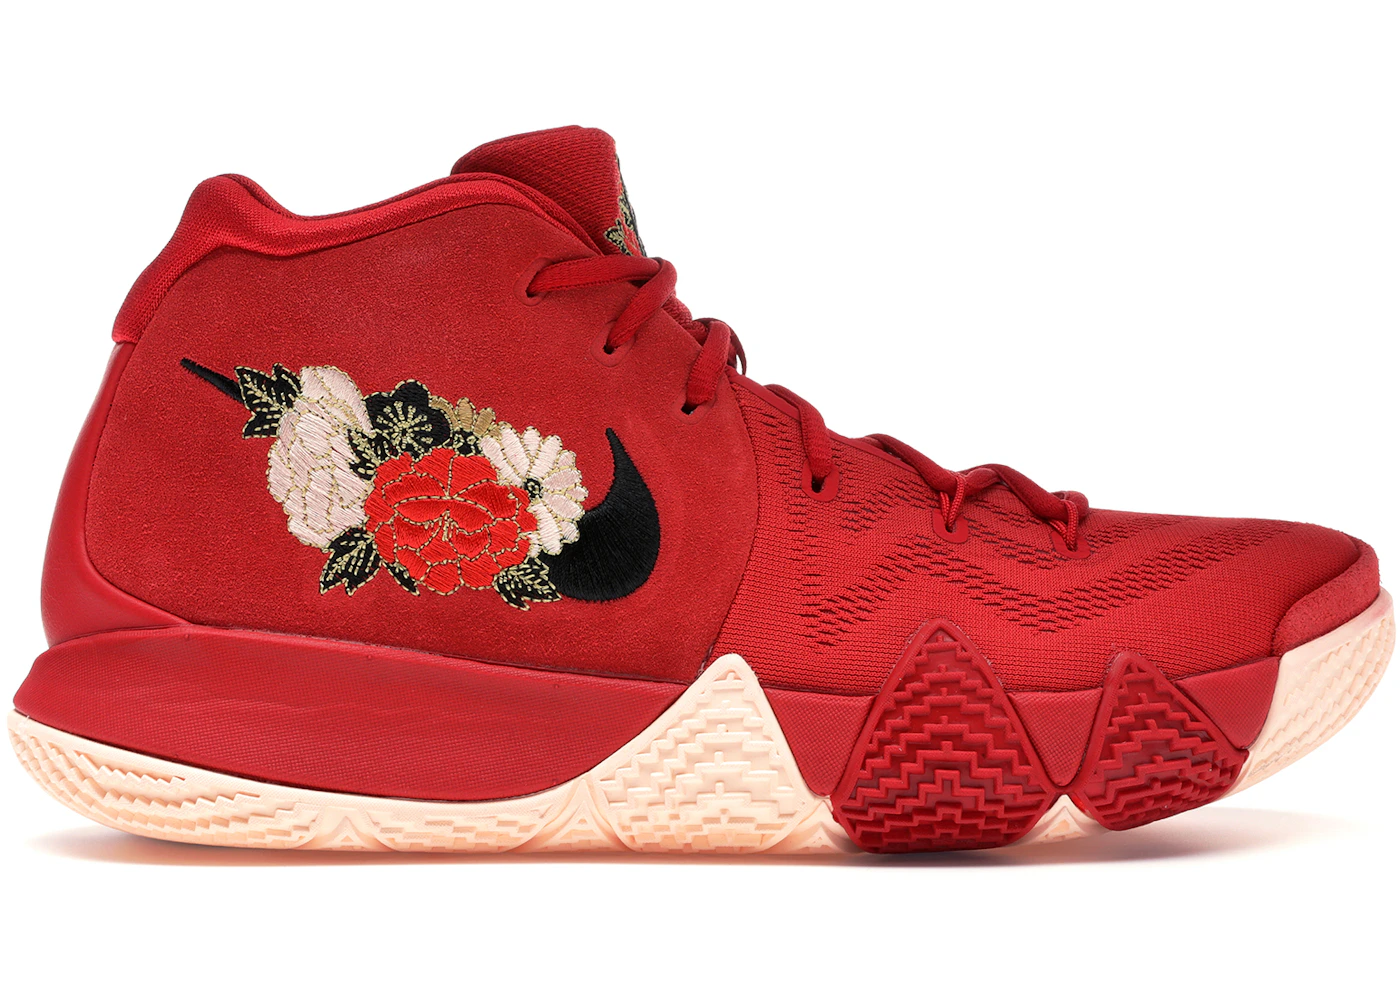 Nike Kyrie 4 Chinese New Year (2018) Men'S - 943807-600/943806-600 - Us